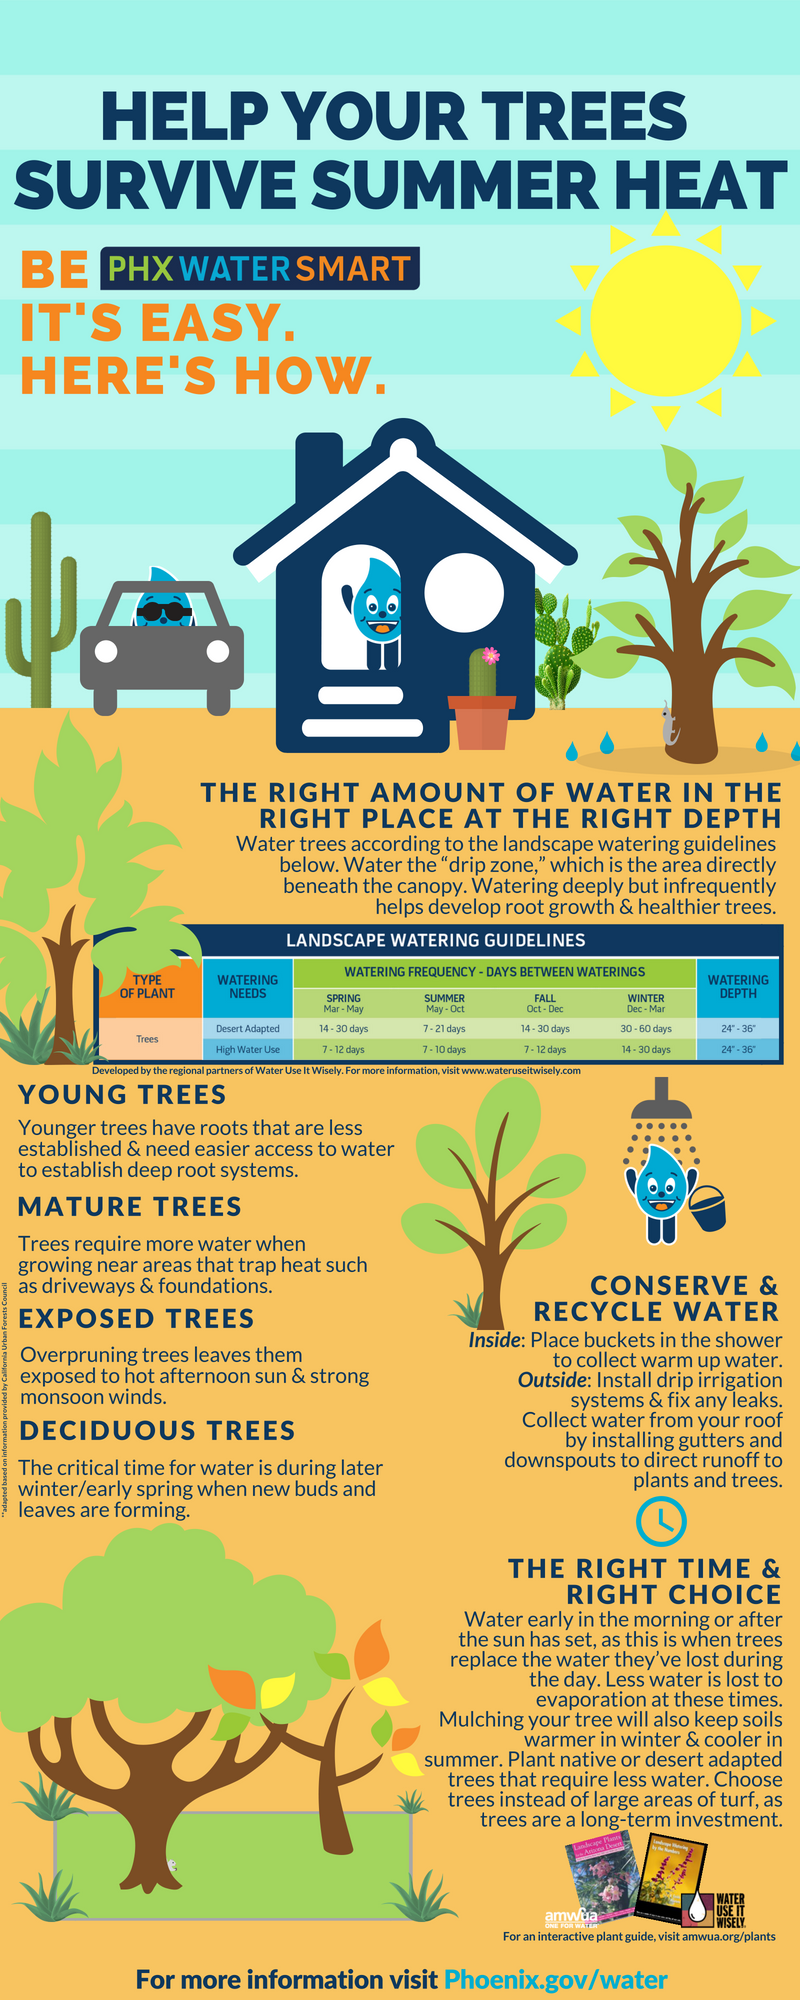 Help your trees survive summer heat. Be PHX WATER SMART. It's easy. Here's how.